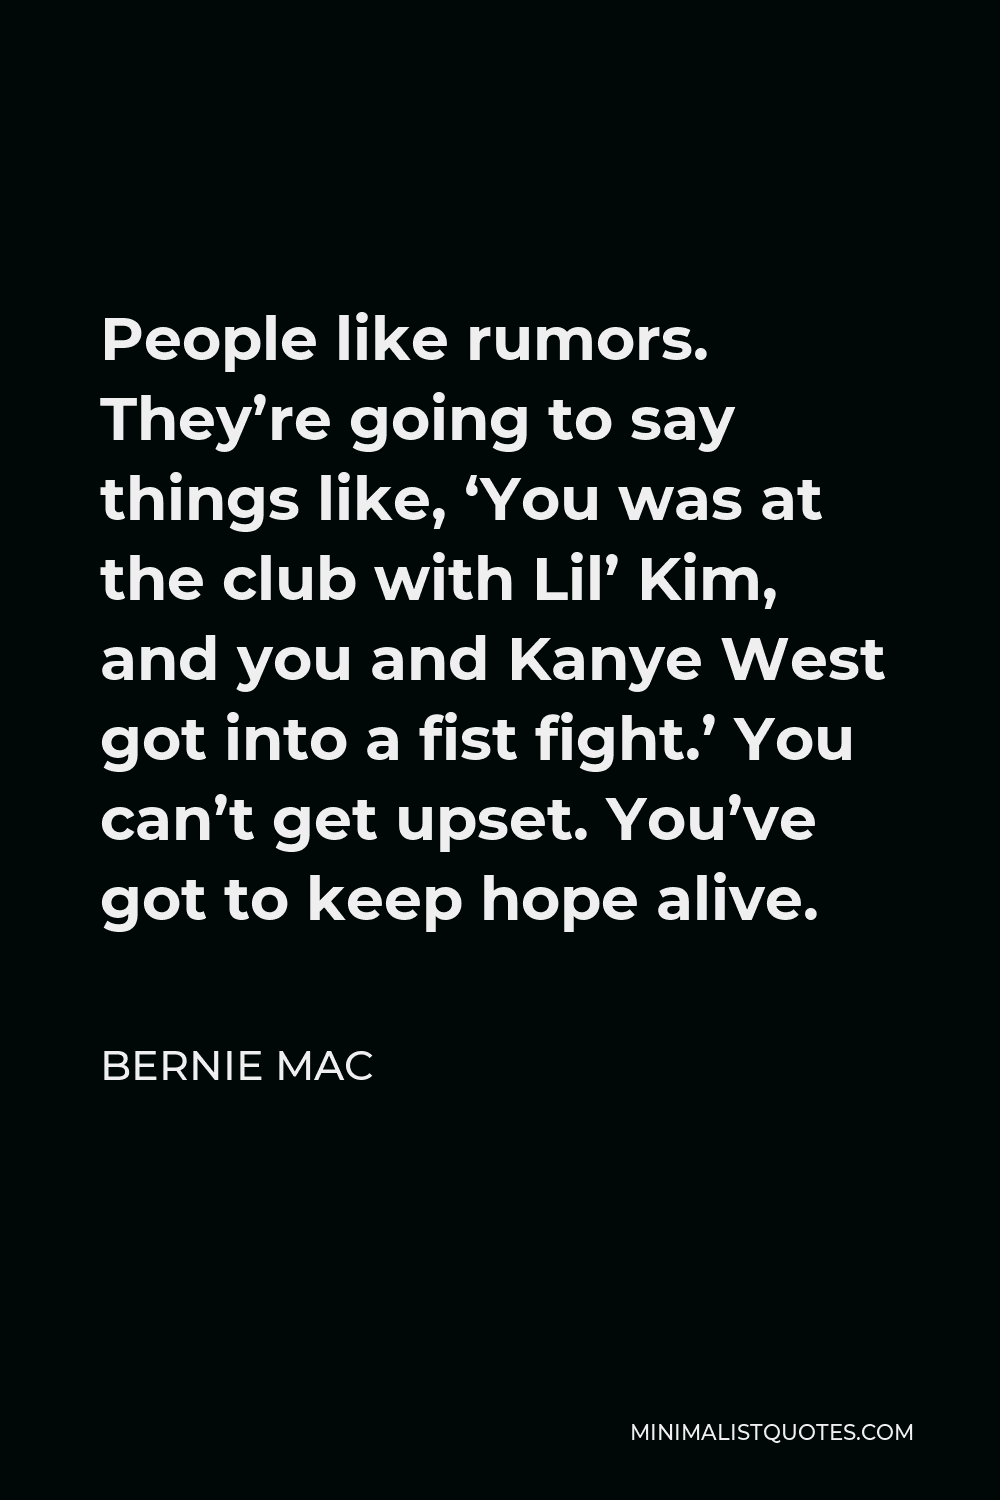 Bernie Mac Quote - People like rumors. They’re going to say things like, ‘You was at the club with Lil’ Kim, and you and Kanye West got into a fist fight.’ You can’t get upset. You’ve got to keep hope alive.